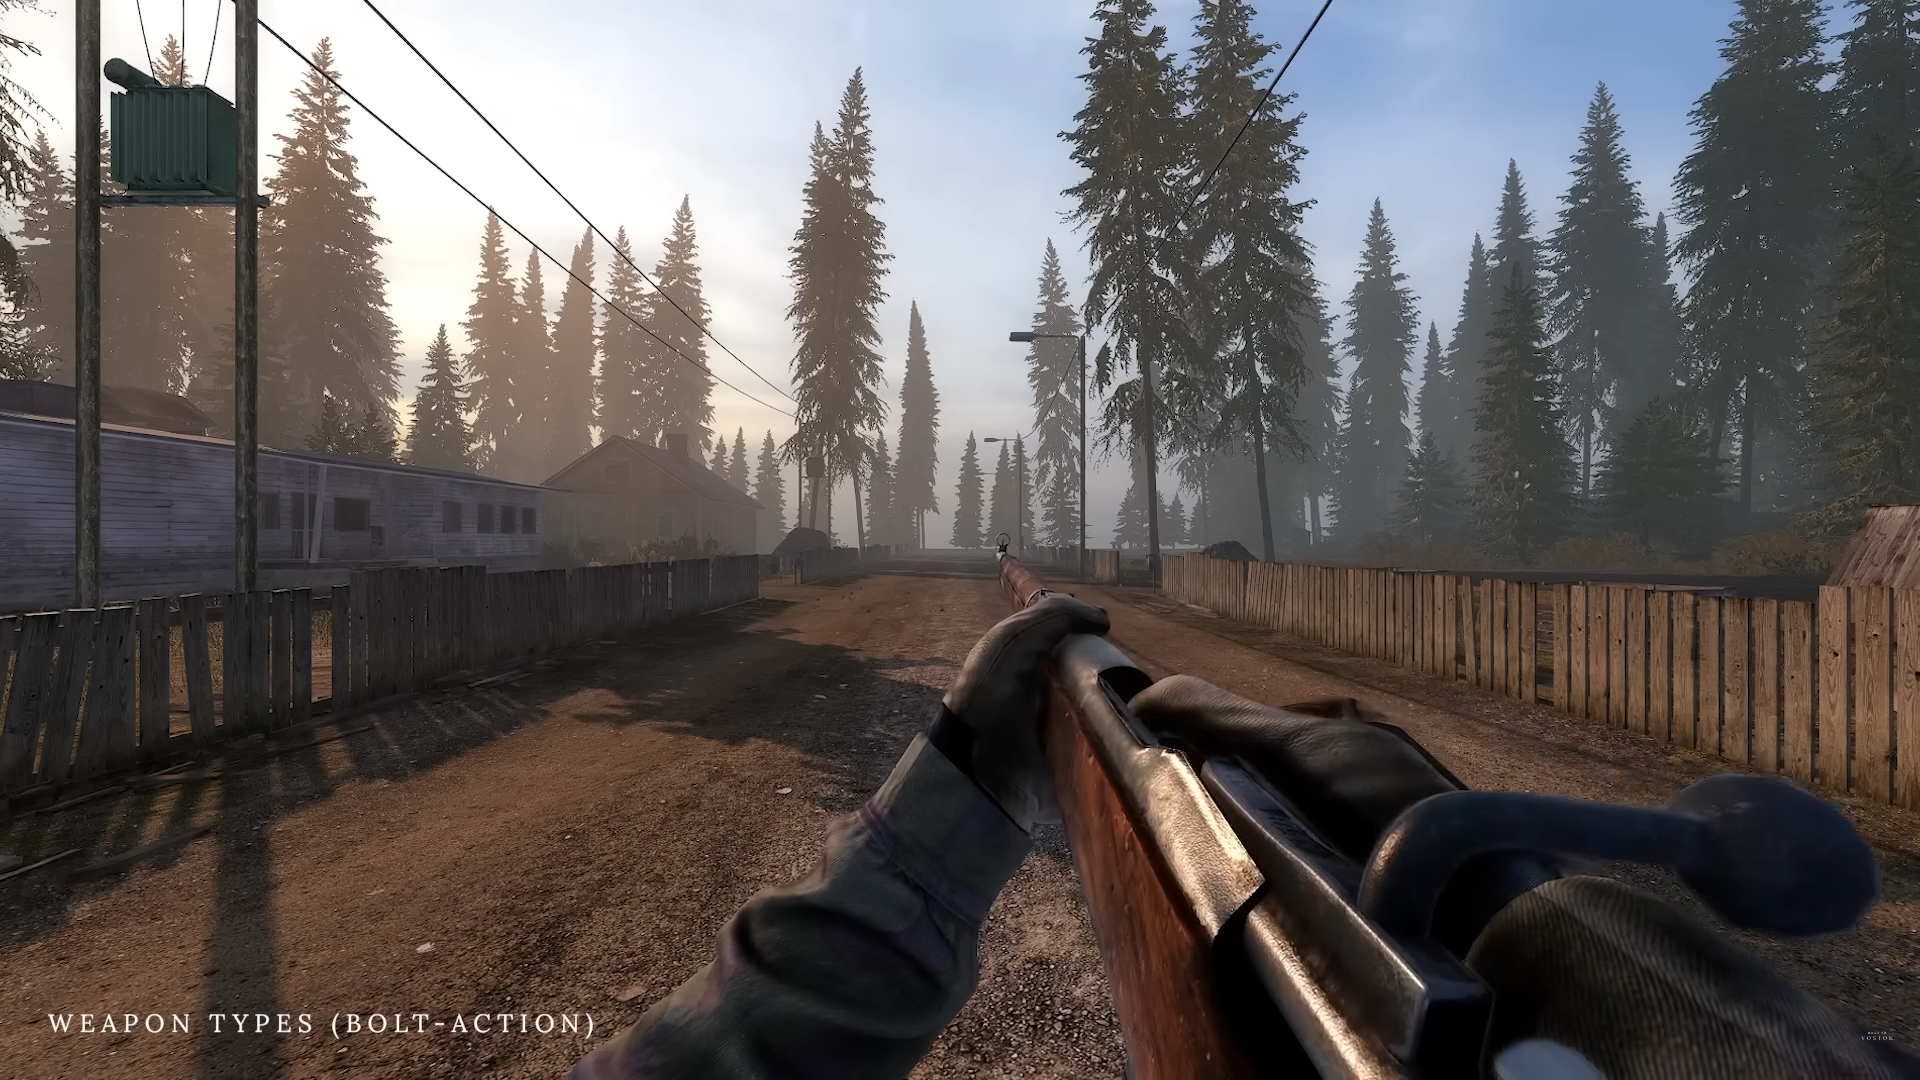 Hardcore survival shooter Road to Vostok is looking really good after switching engines from Unity to Godot